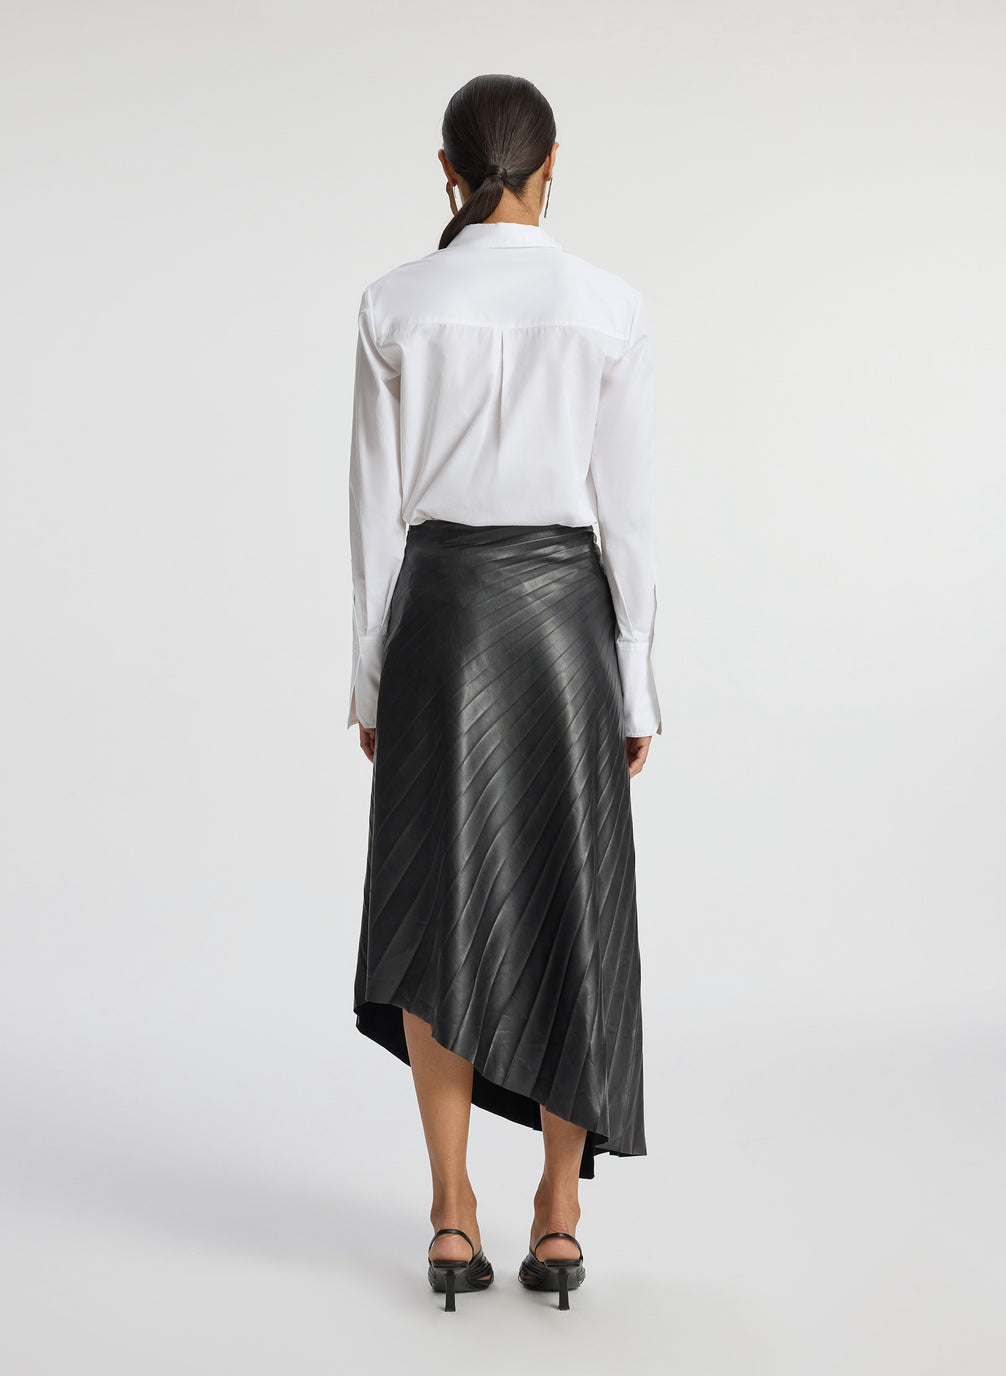 A.L.C. Tracy Vegan Leather Skirt